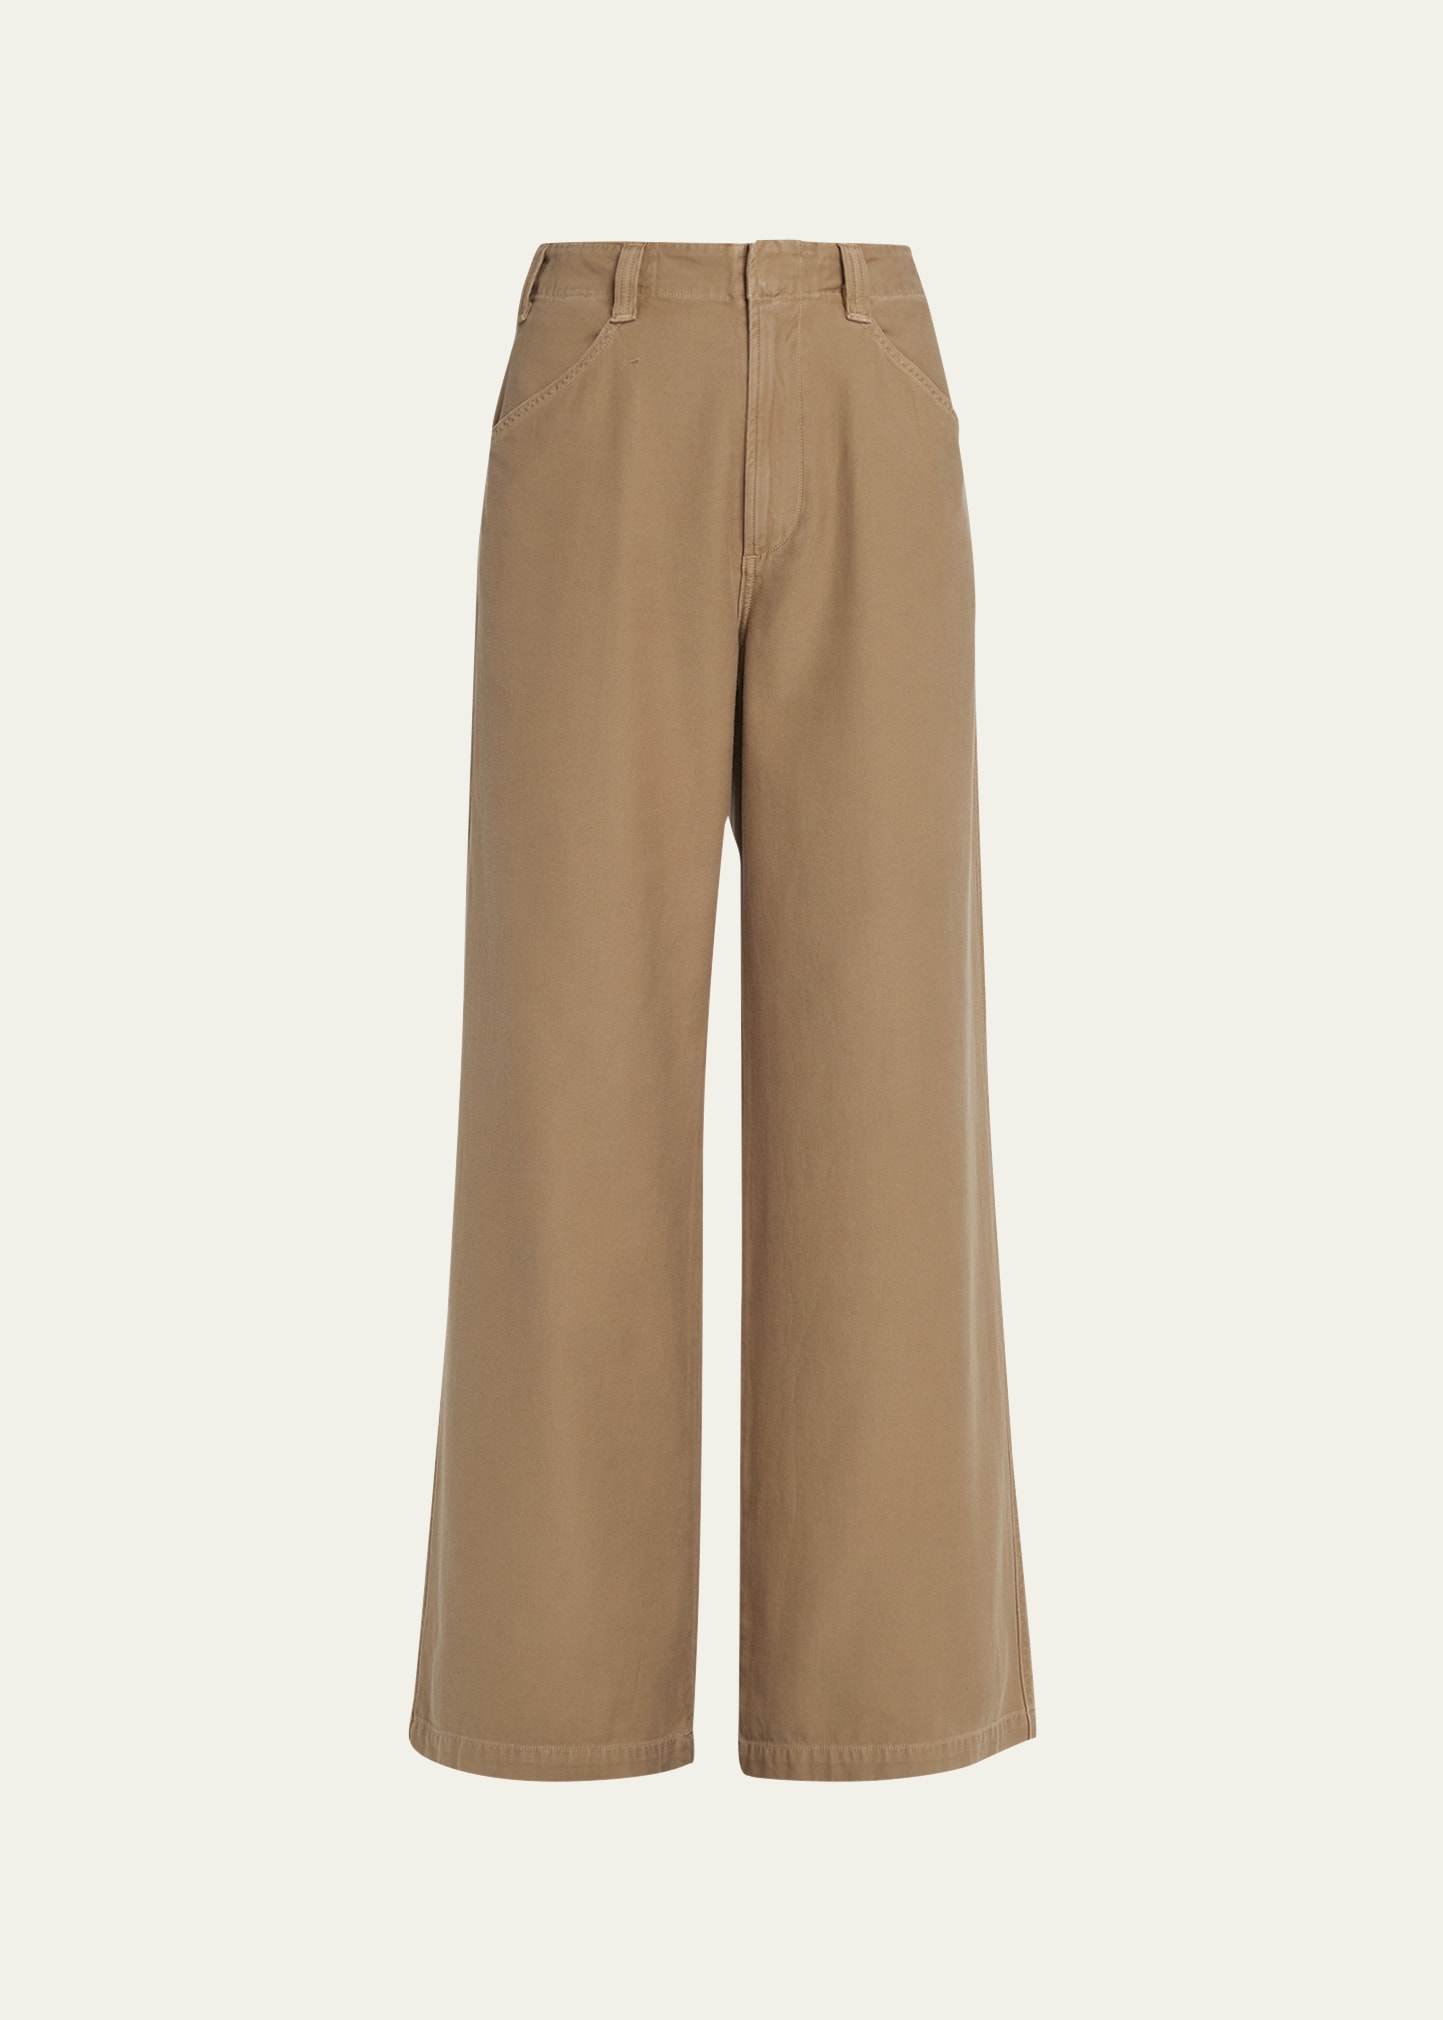 Citizens Of Humanity Paloma Utility Trousers In Dark Cocolette